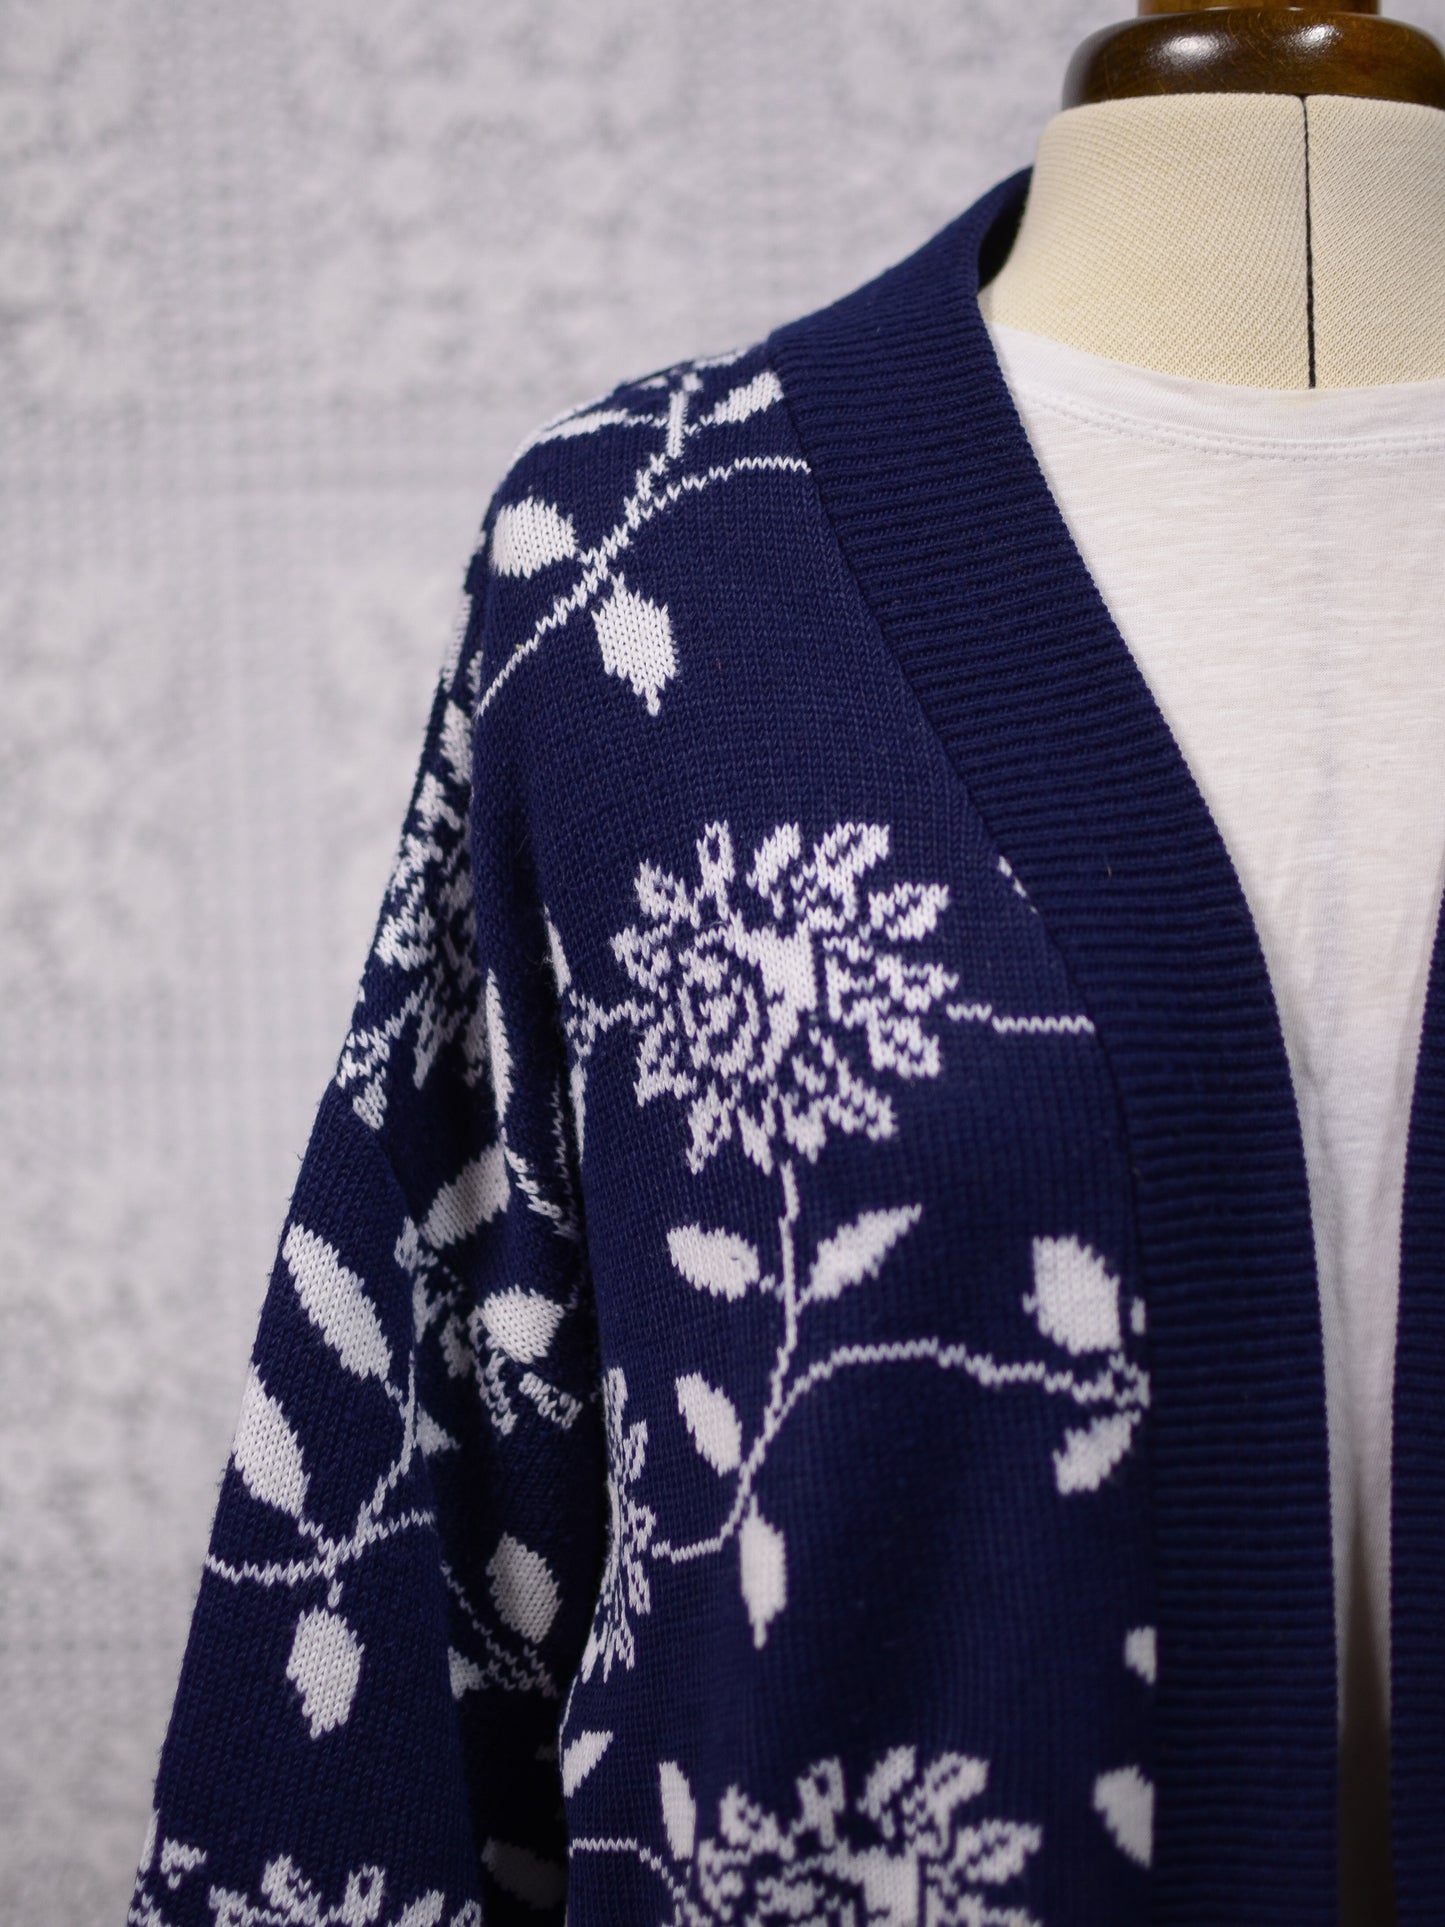 1980s Littlewoods blue and white floral cardigan